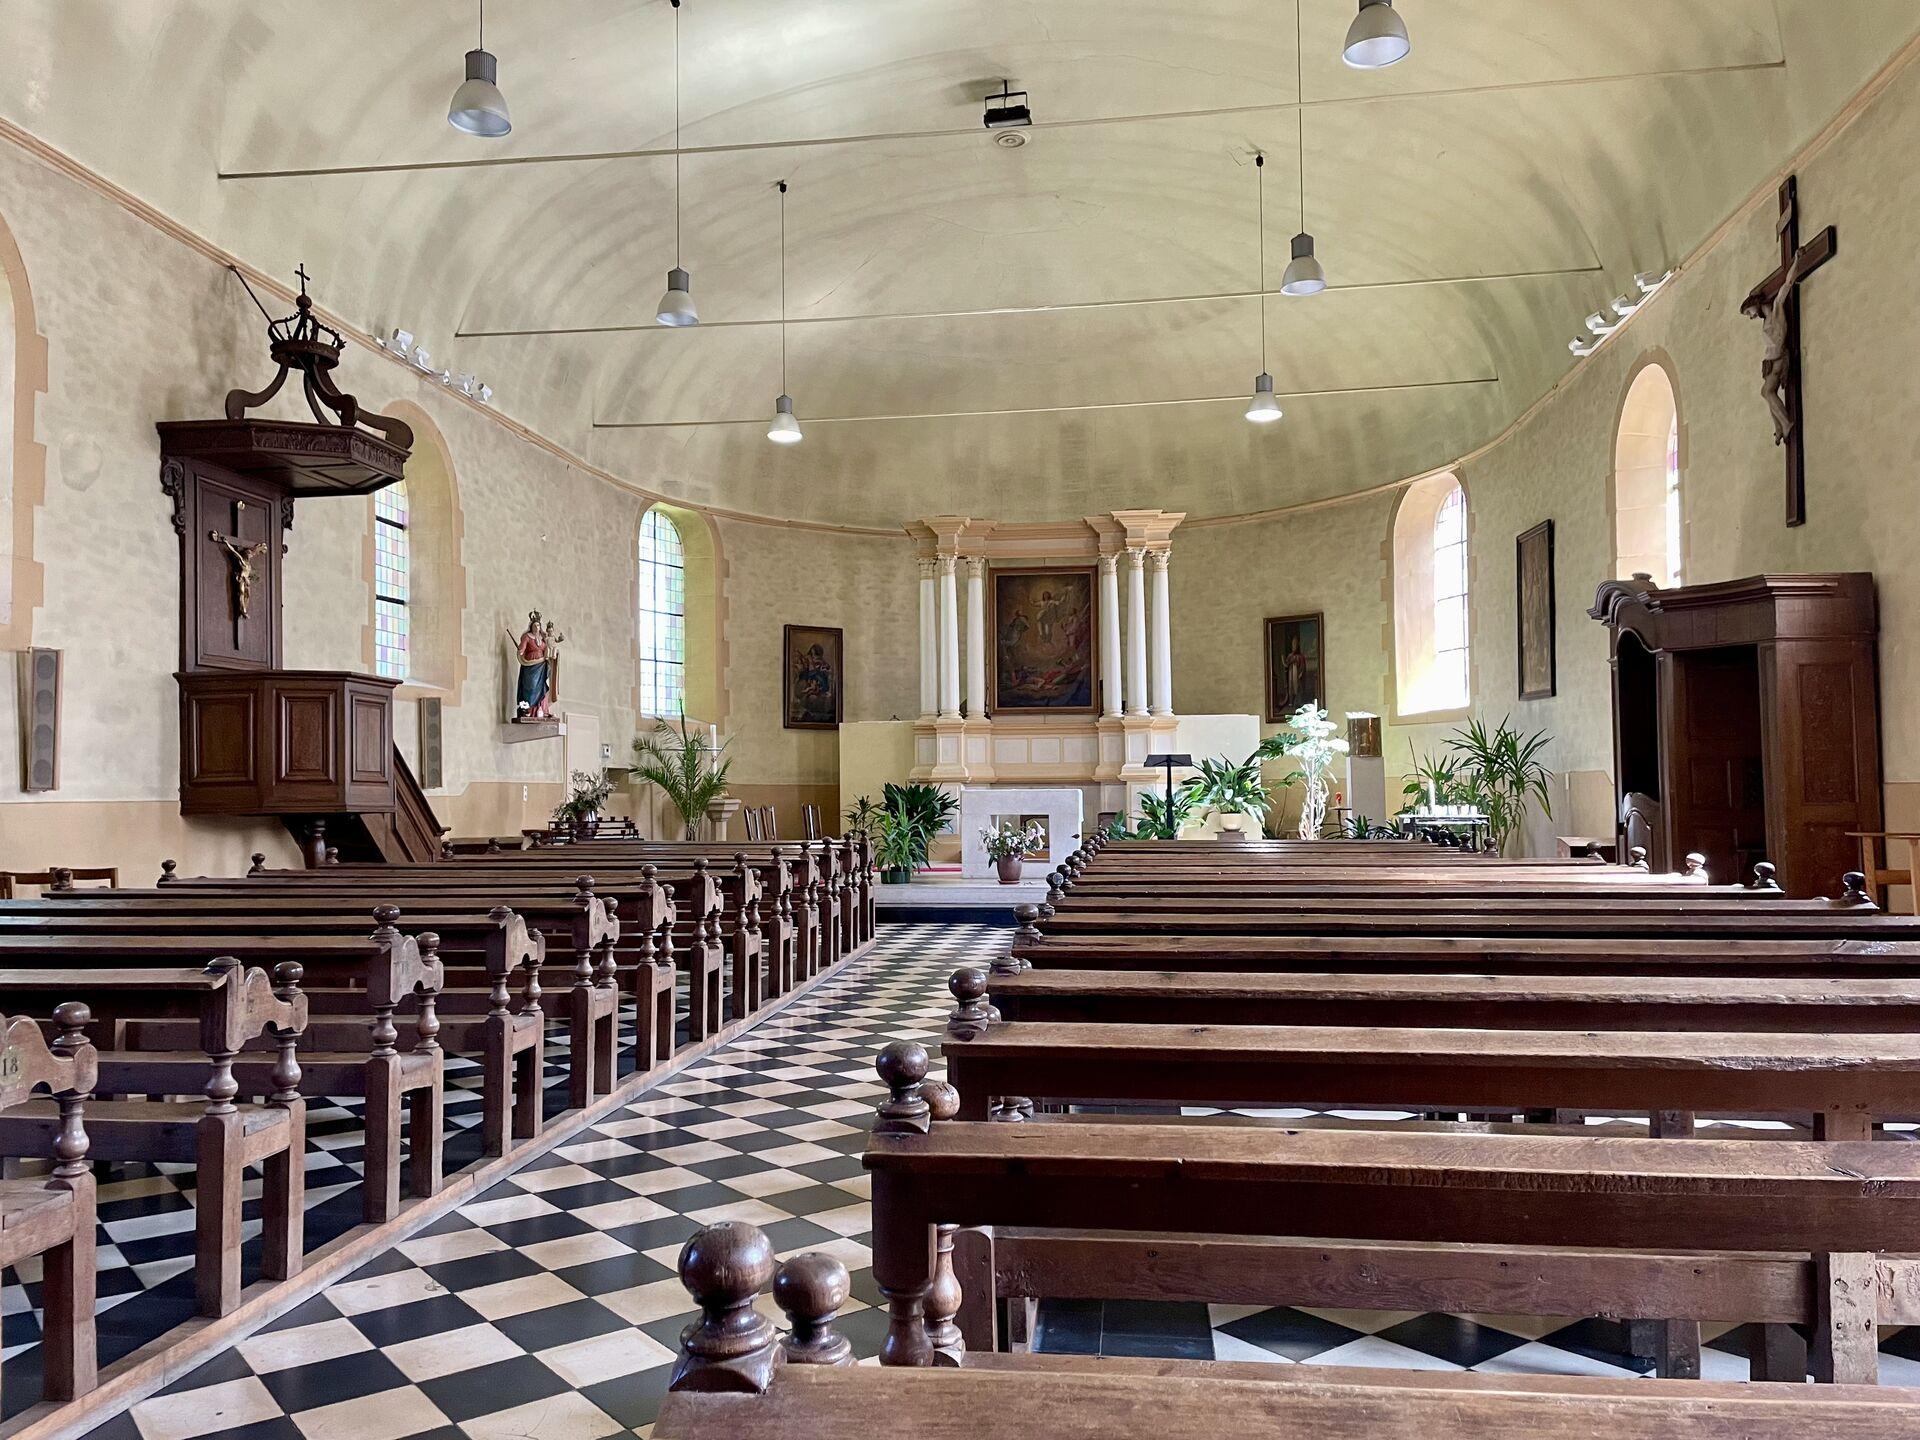 The inside of the 17th-century church in Bohan